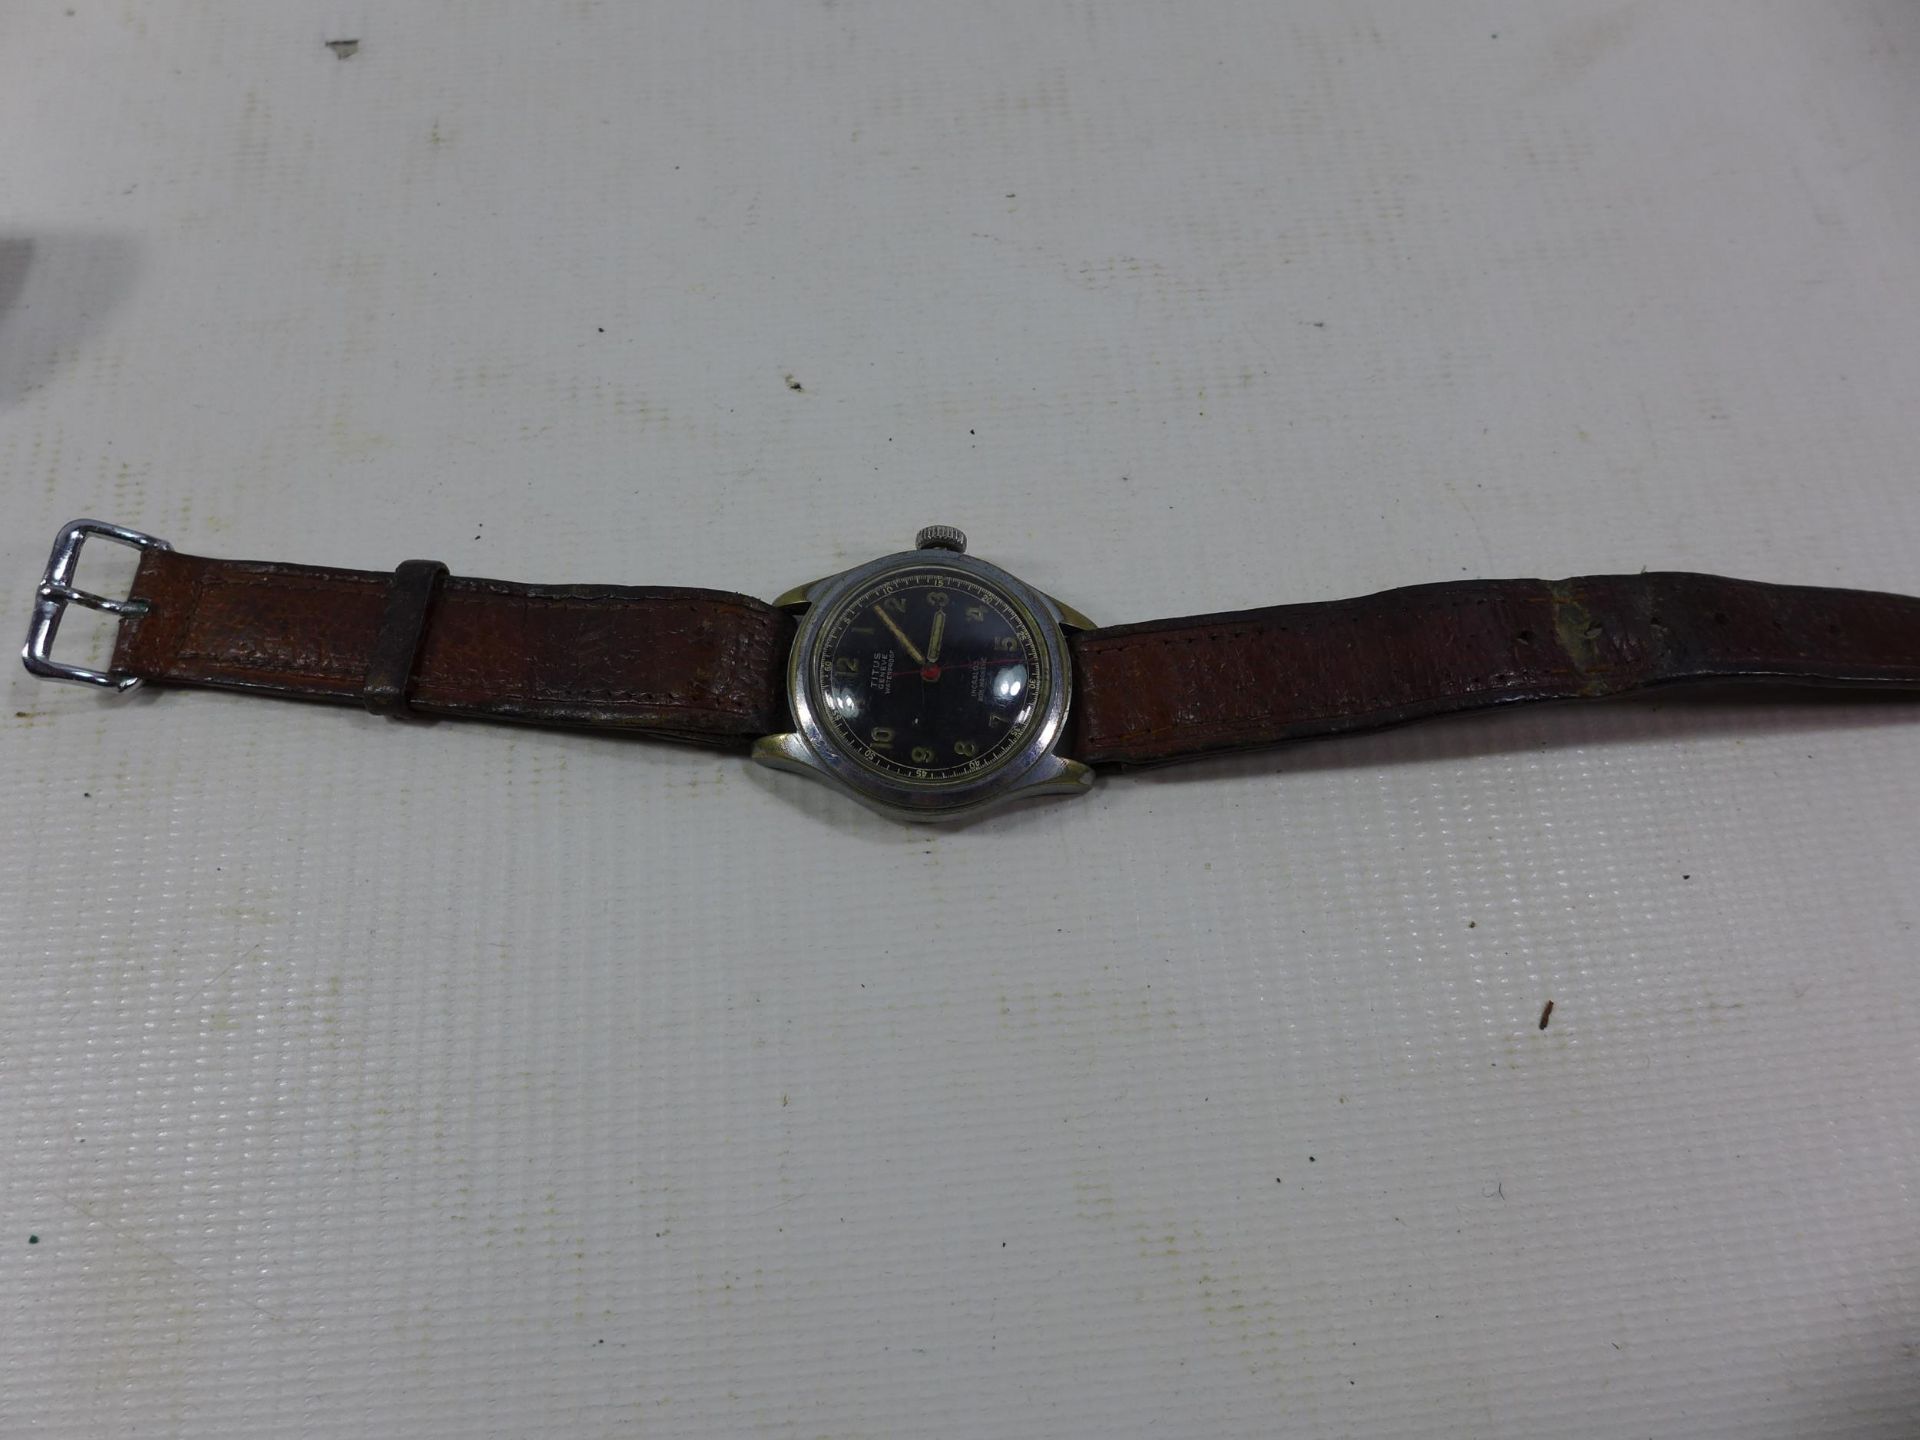 A TITUS MANS WRISTWATCH, DIAMETER OF FACE 2.5CM, NOT WORKING WHEN CATALOGUED - Image 3 of 4